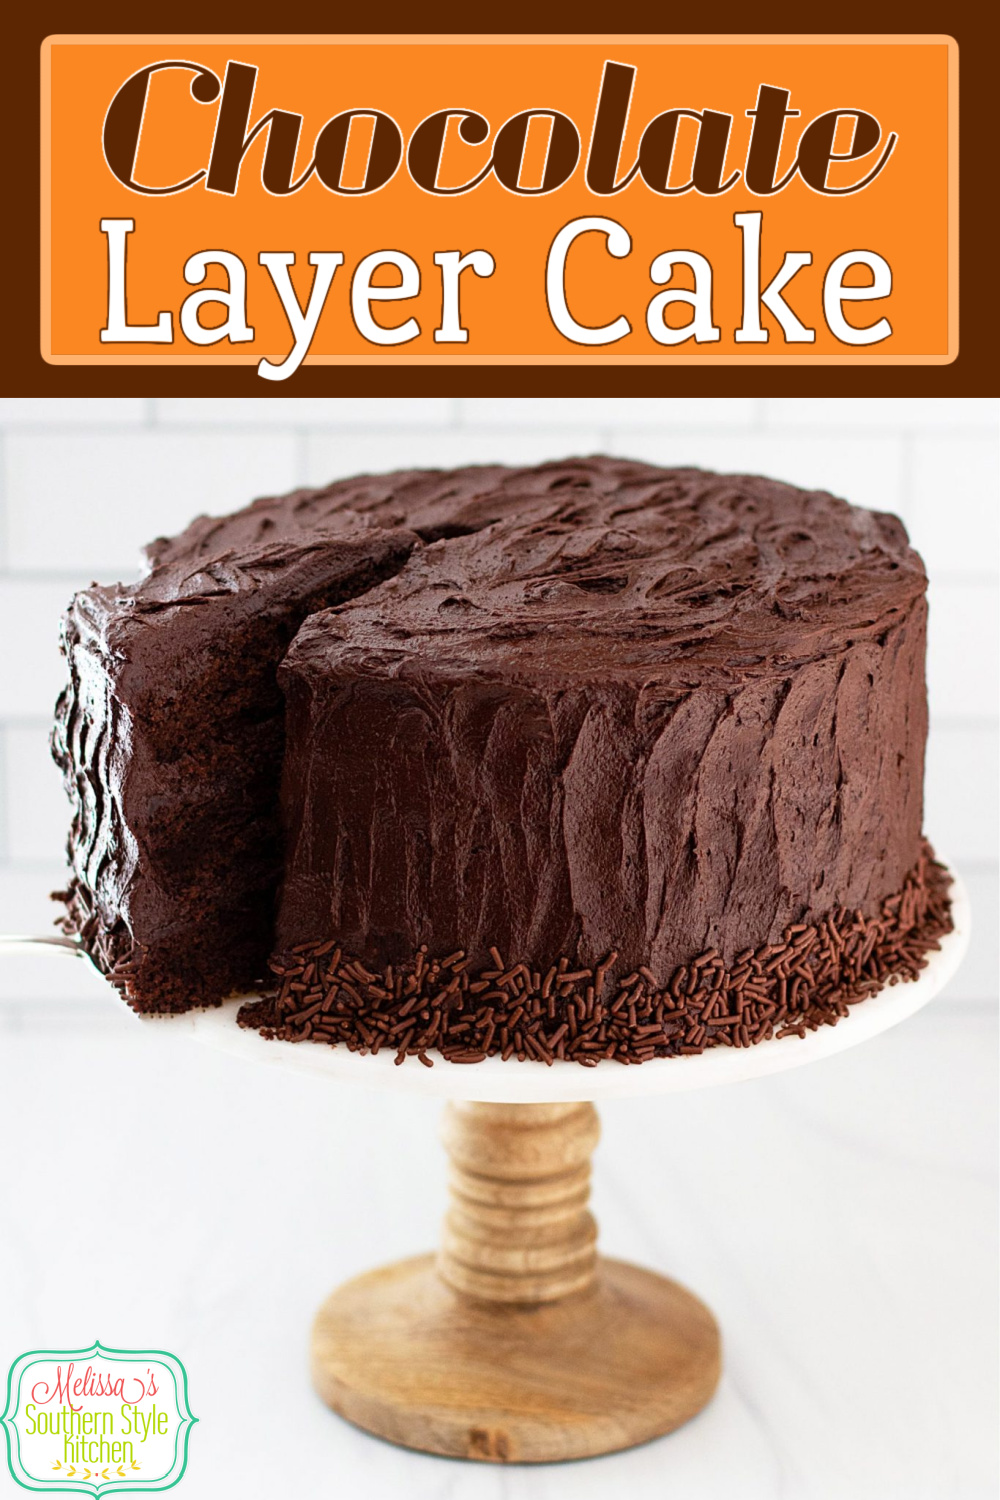 This made from scratch Best Chocolate Cake Recipe will turn any occasion into something special #chocolatecake #chocolatelayercake #chocolatefrostingrecipe #bestchocolatecake #cakerecipes #sourcreamfrosting #southerndesserts #desserts #dessertfoodrecipes #birthdaycake via @melissasssk